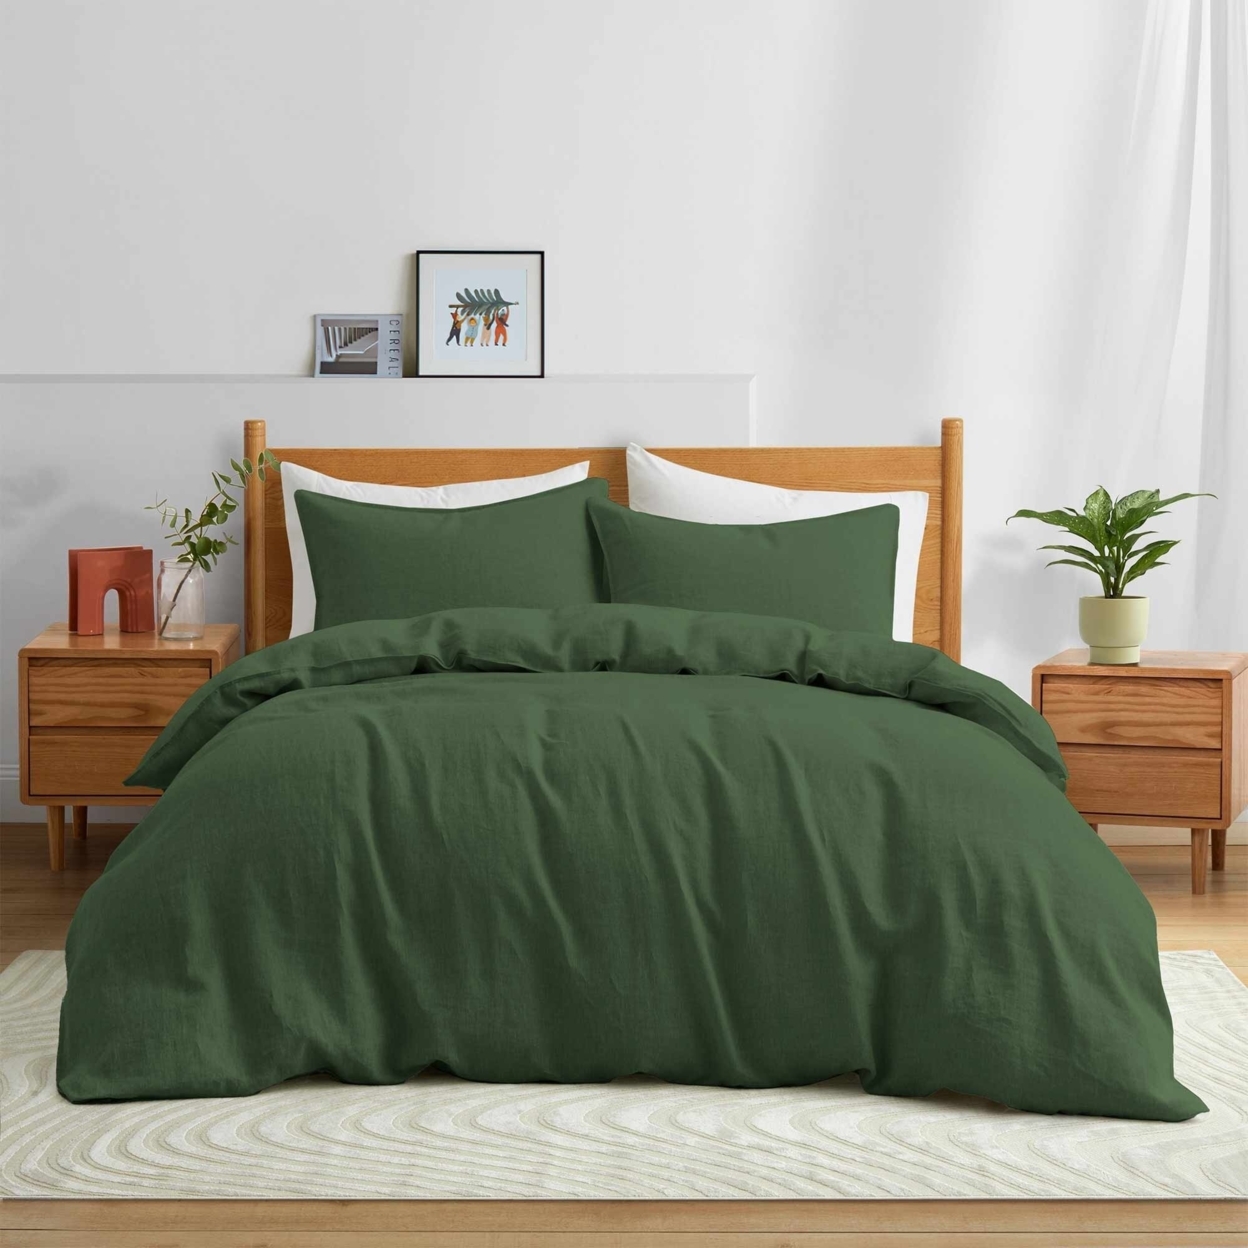 Premium Flax Linen Duvet Cover Set With Pillowcases Moisture Wicking And Breathable - Lunar Green, Twin